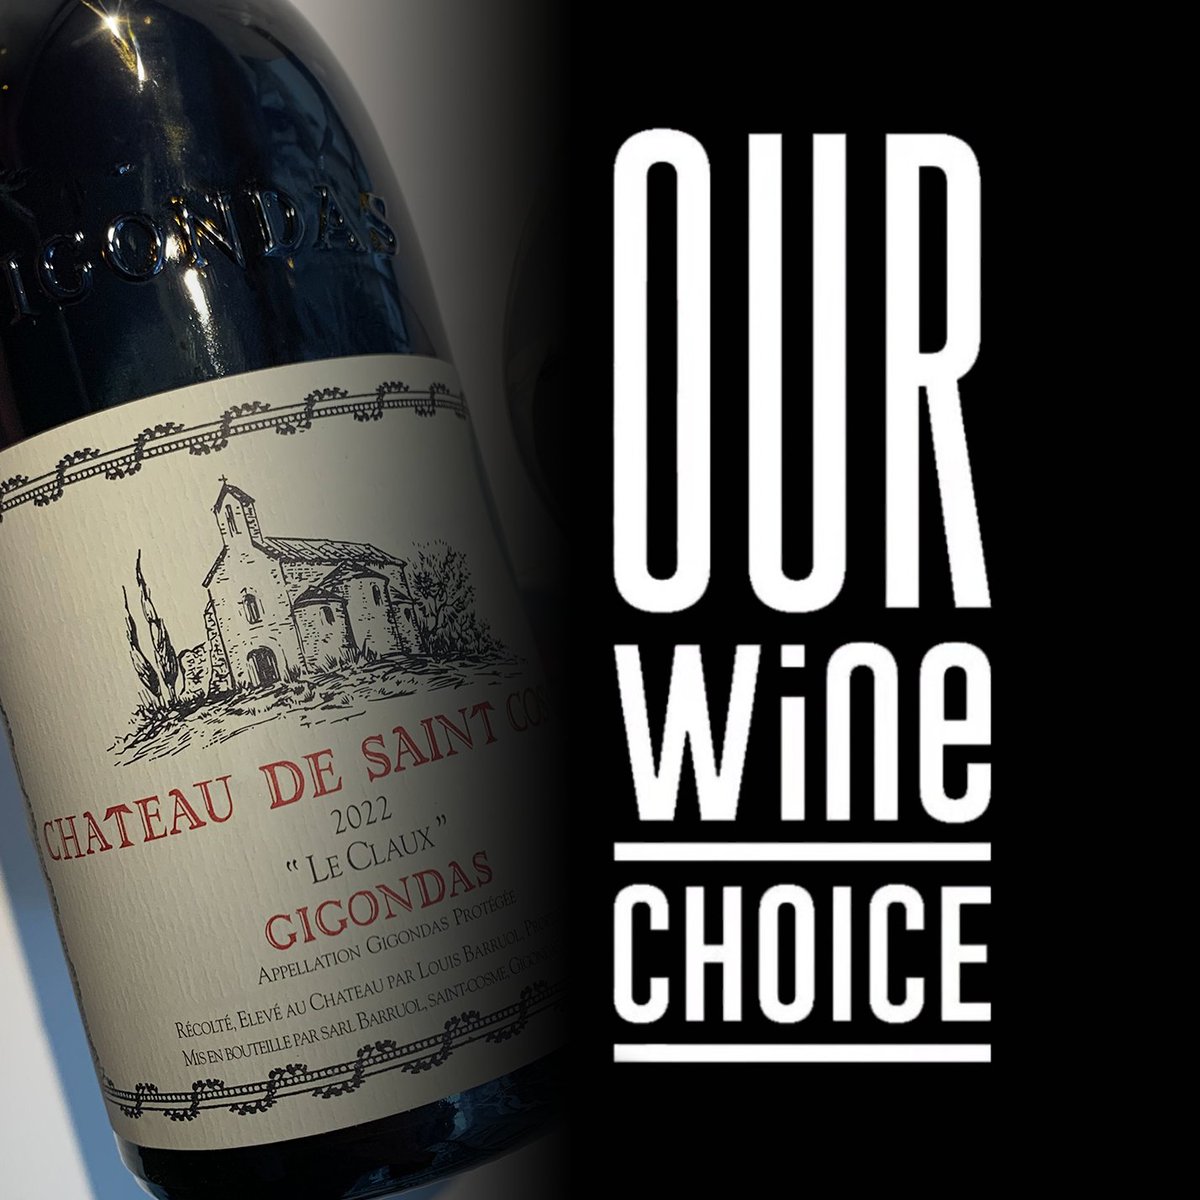 The 97-point Chateau de Saint Cosme Gigondas Le Claux 2022 is our Wine Choice. Sourced from venerable limestone vineyards, the wine unites intensity and elegance with a vibrant, lively core and purity derived from its old #grenache vines. See more: jamessuckling.com/wine-tasting-r…